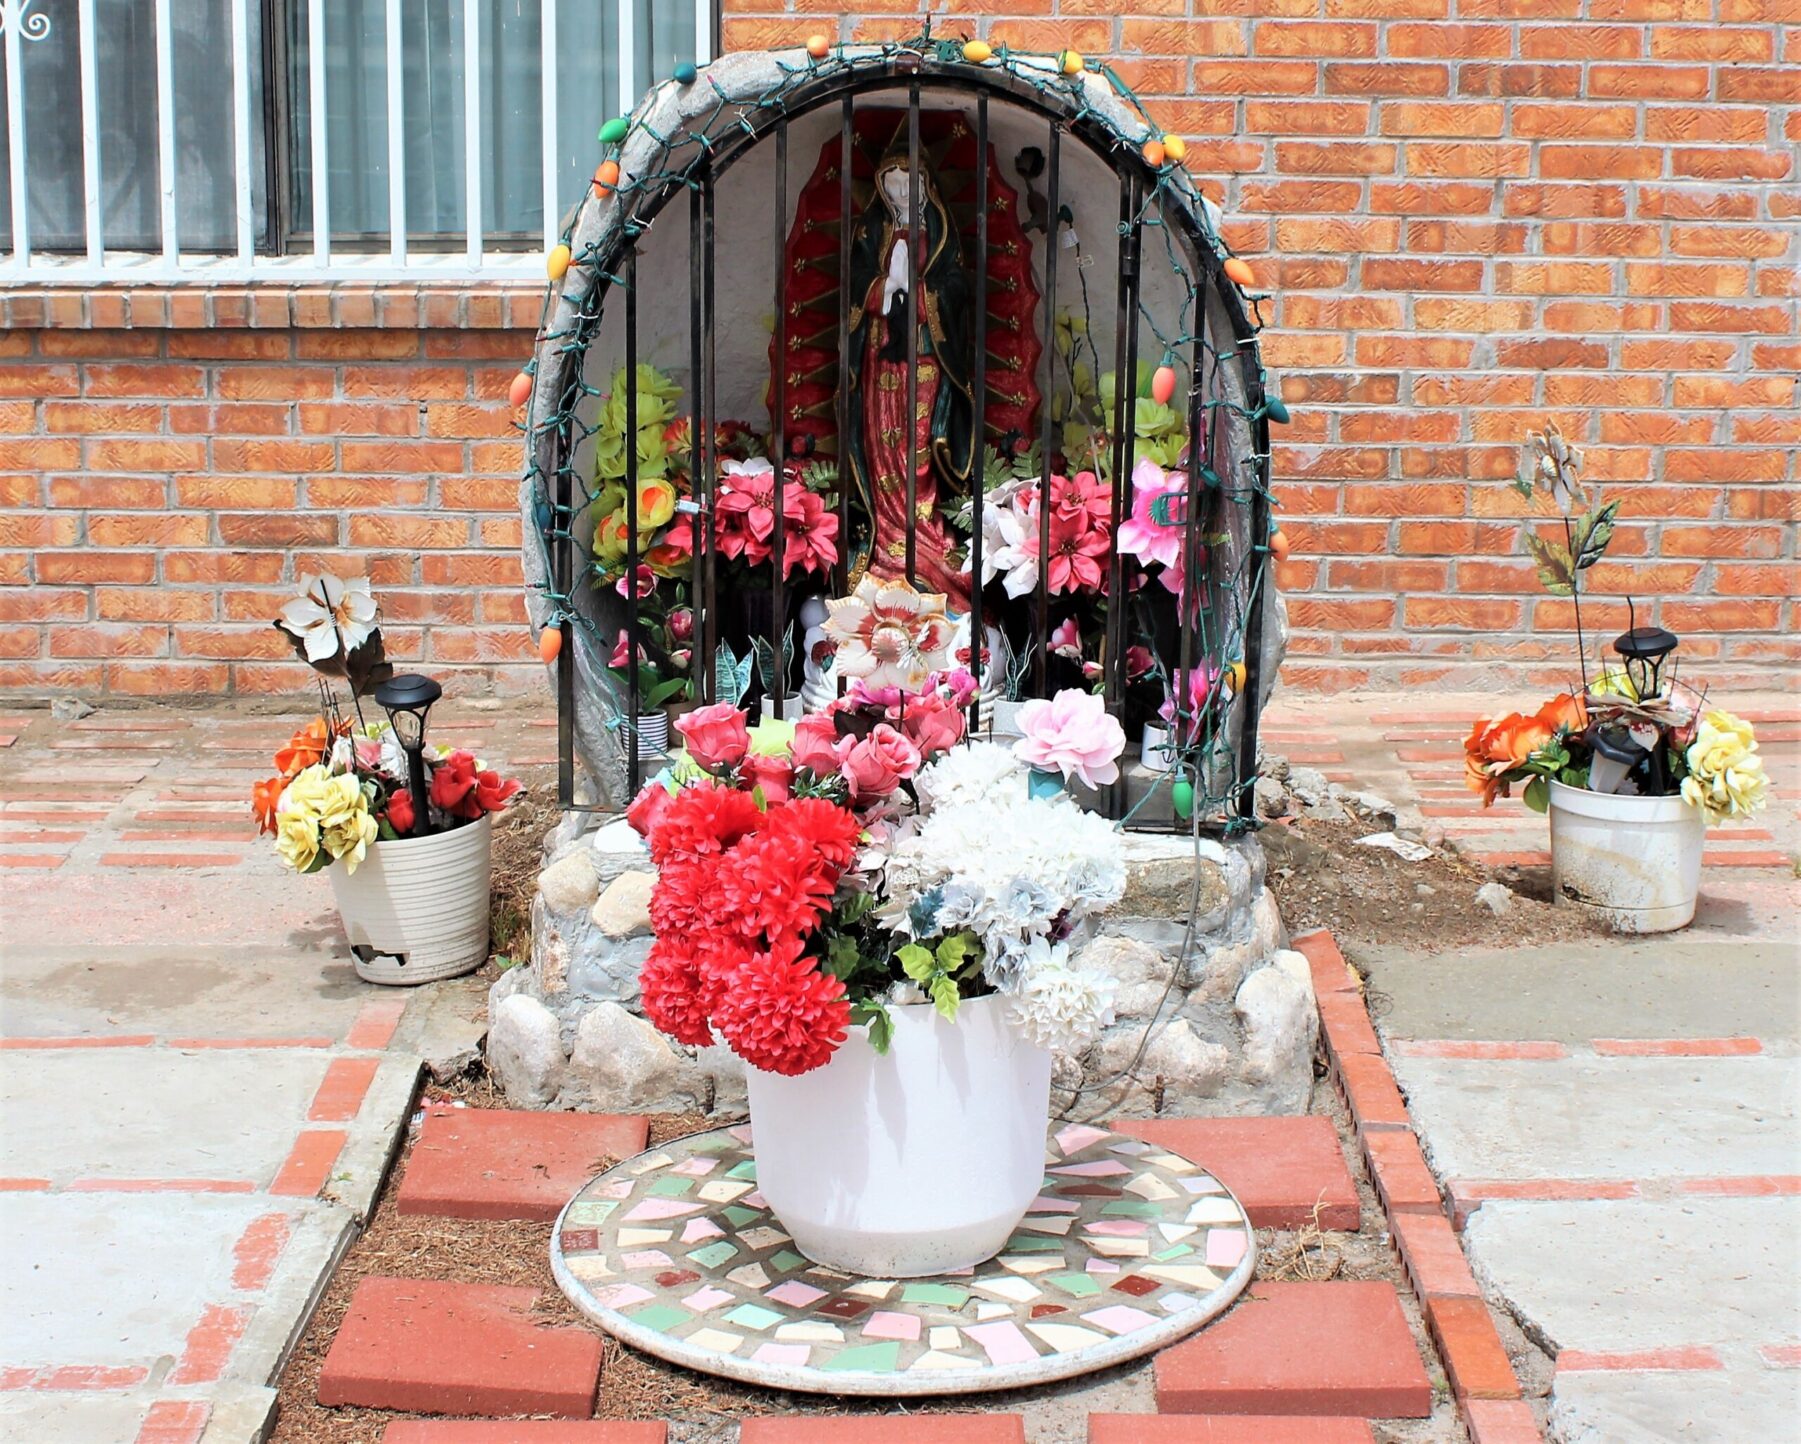 Color photo of female figurine behind bars with flowers